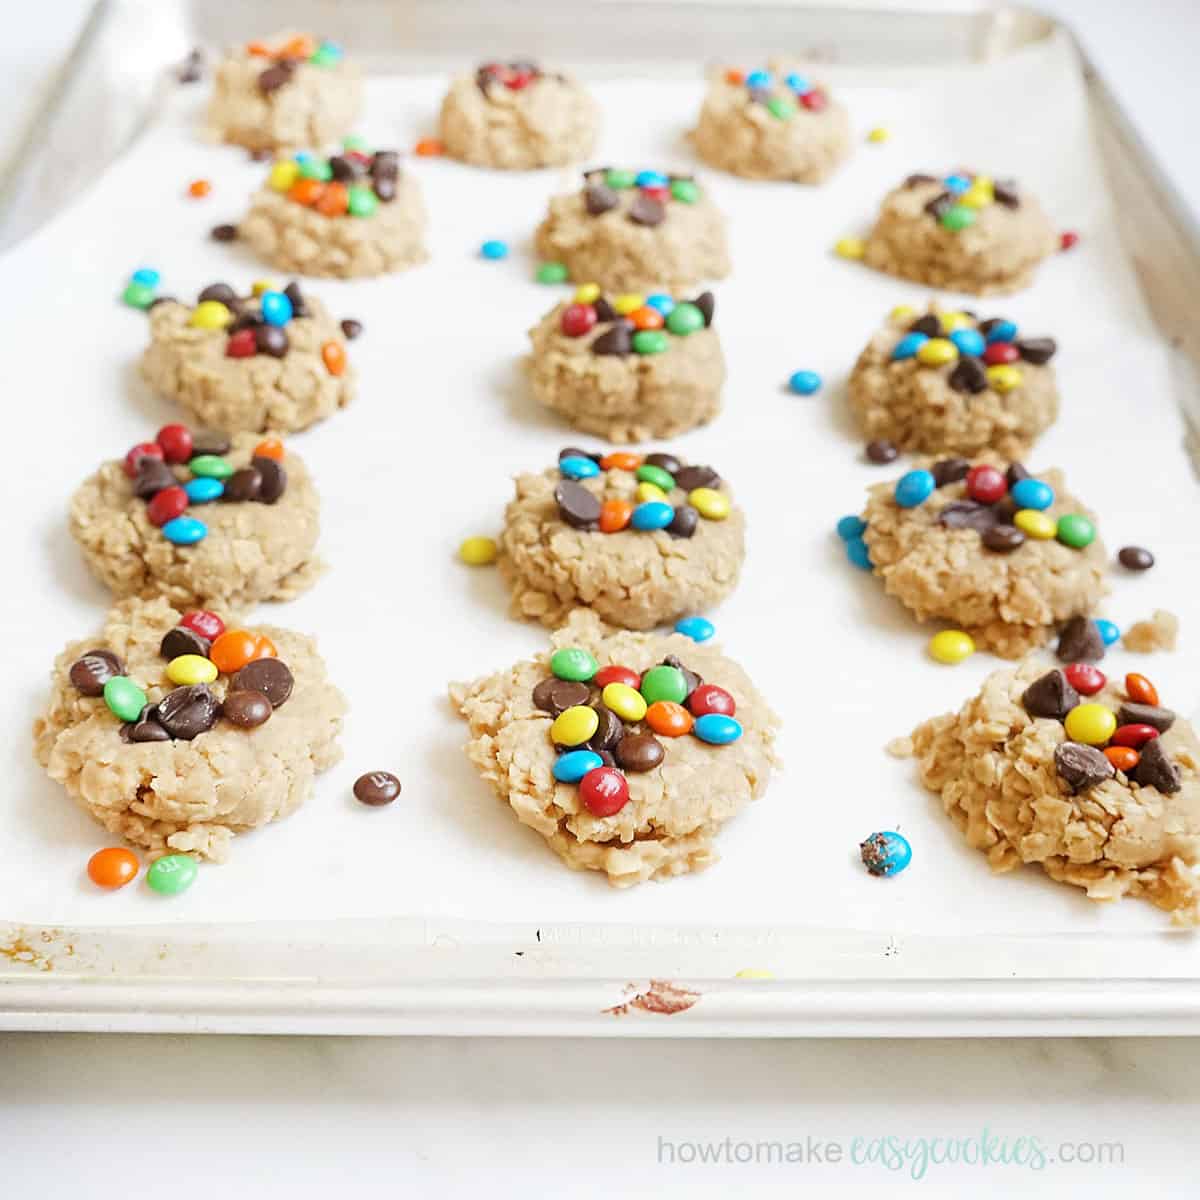 no bake monster cookies on baking tray